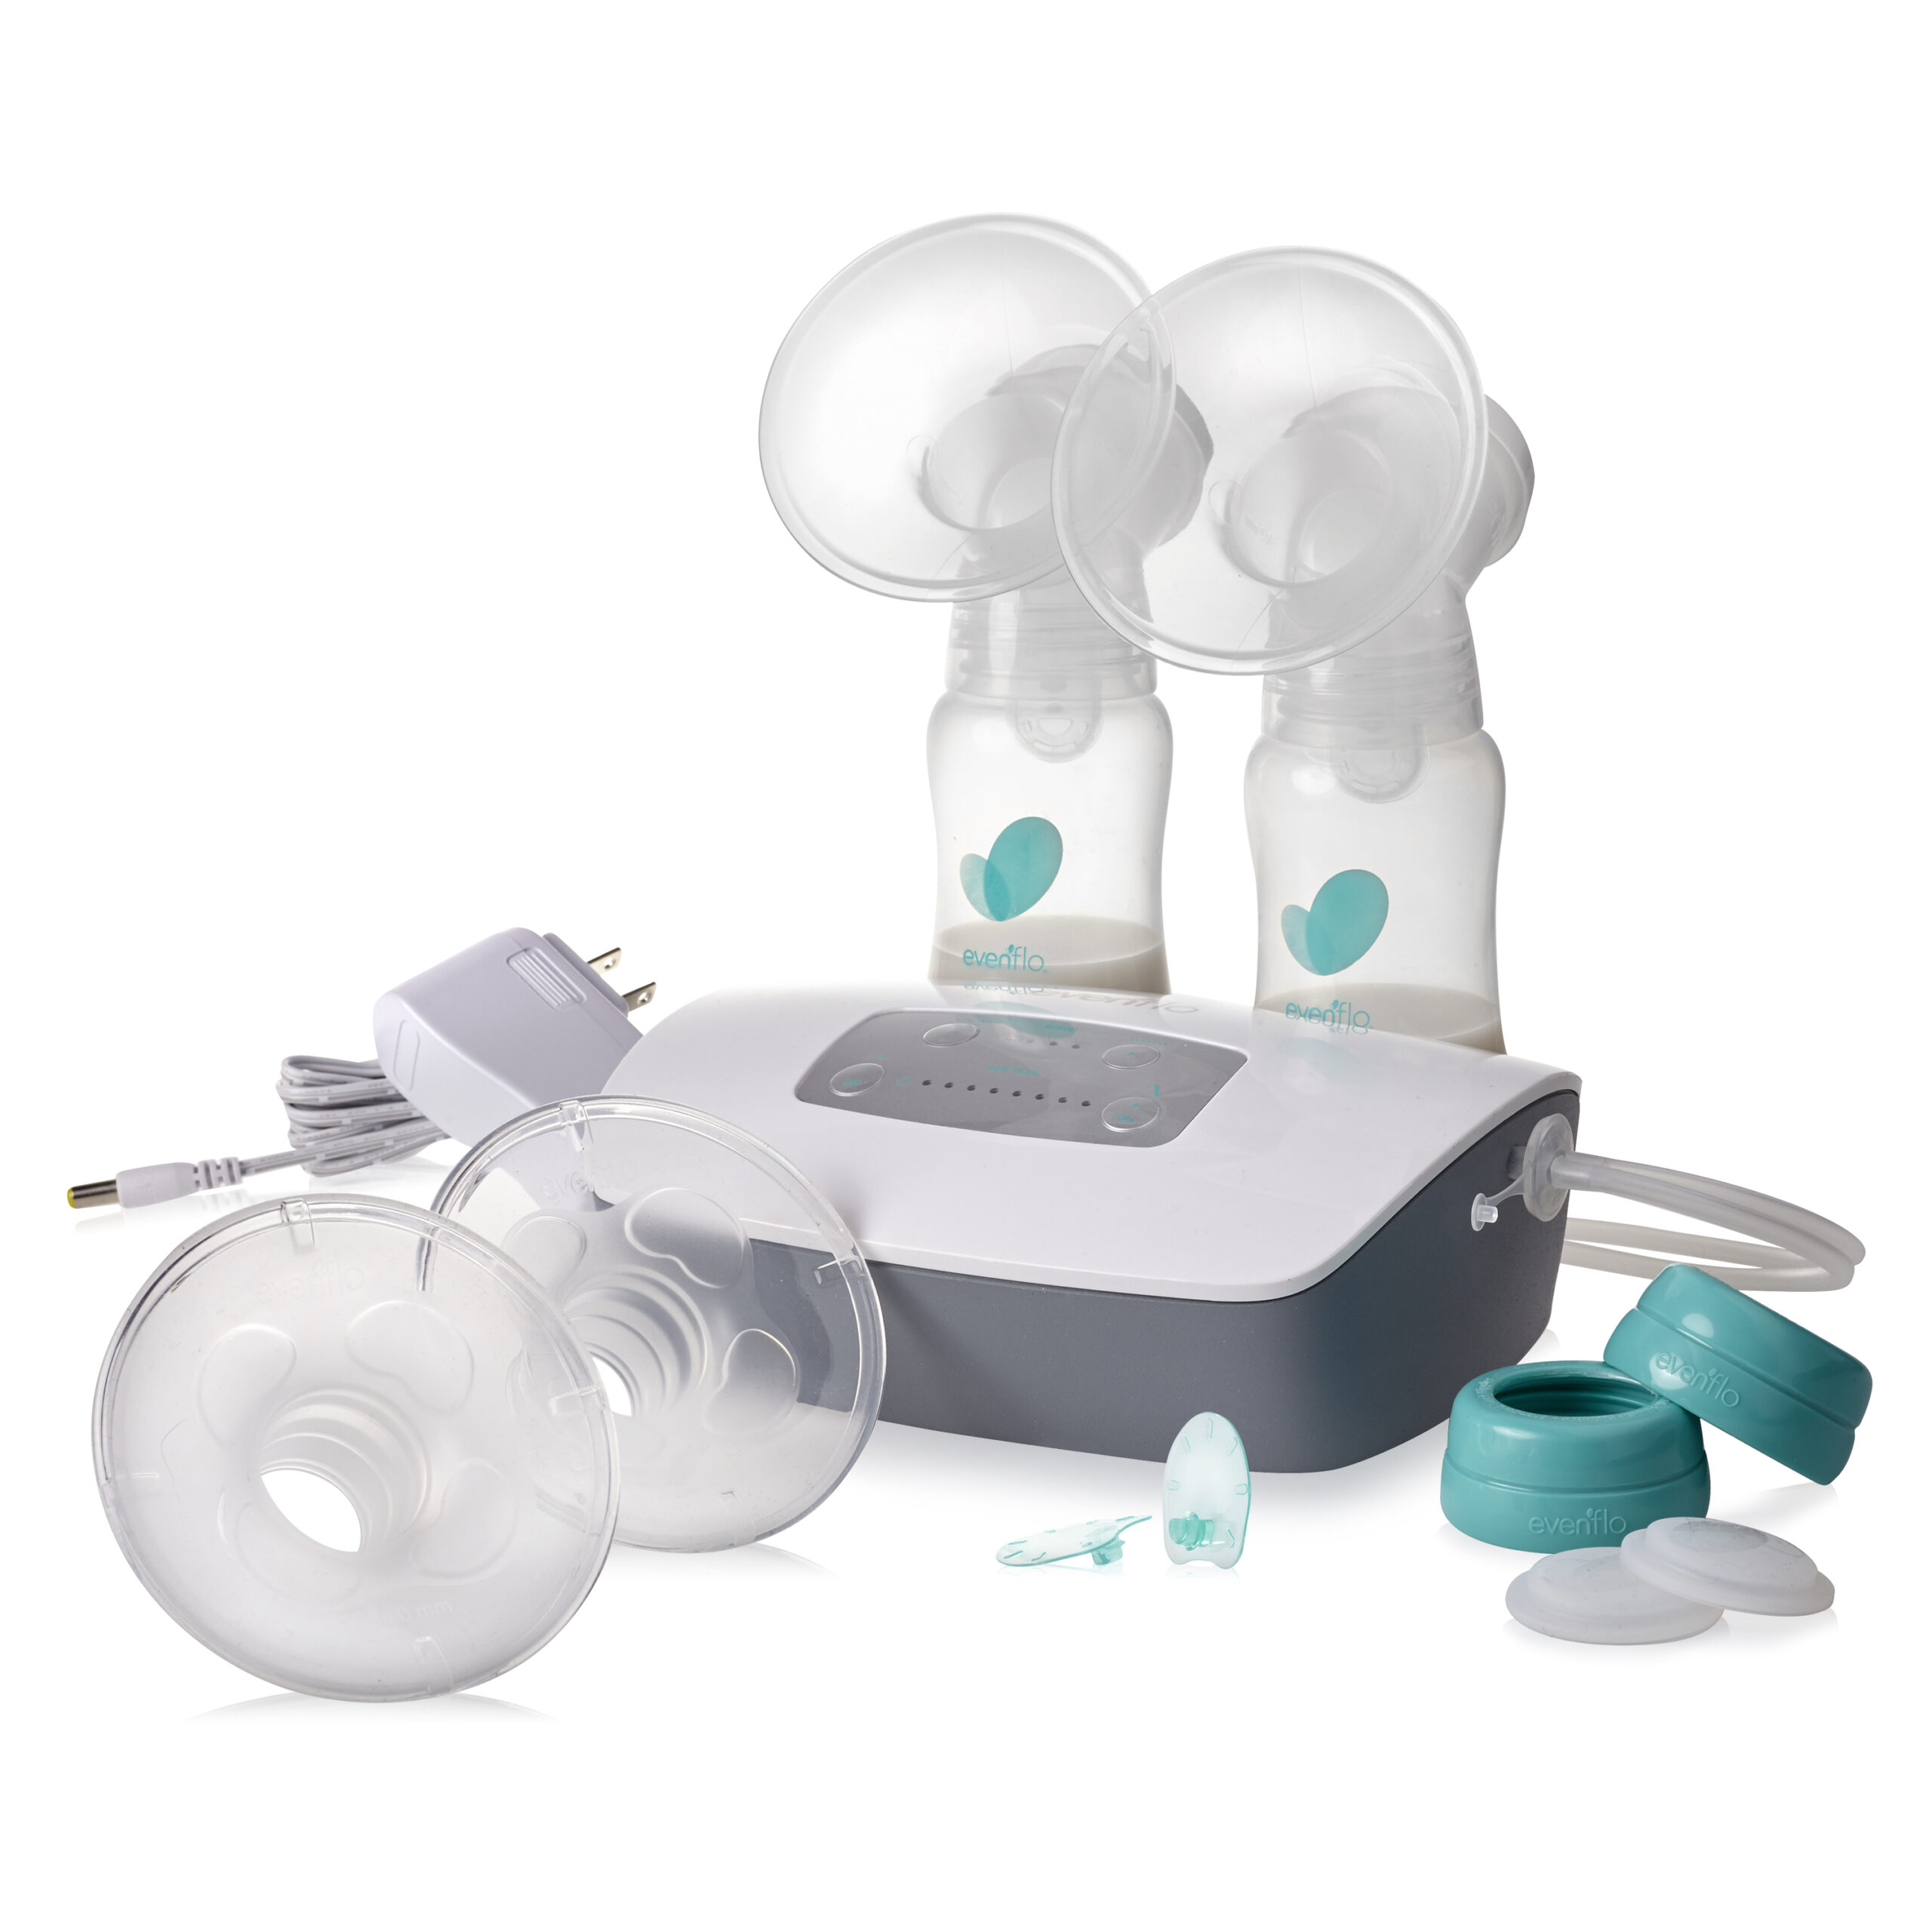 Breast pumps covered by amerigroup cms centers for medicare contact number